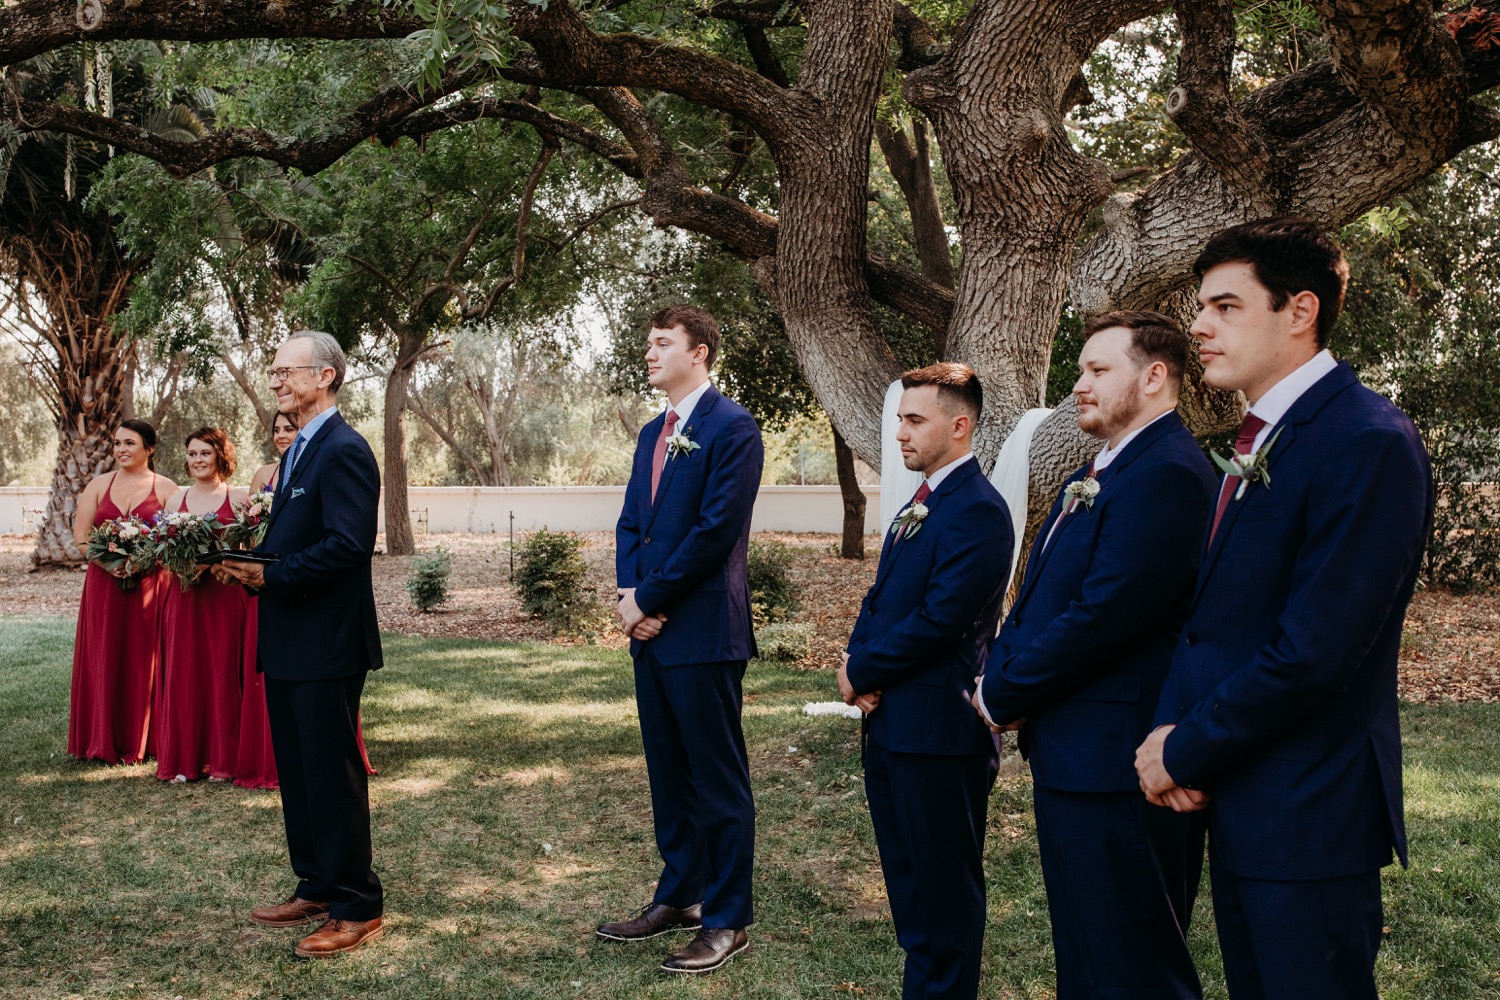 Bridal party and officiant wait for the bride to walk down the aisle at The Maples in Woodland, CA